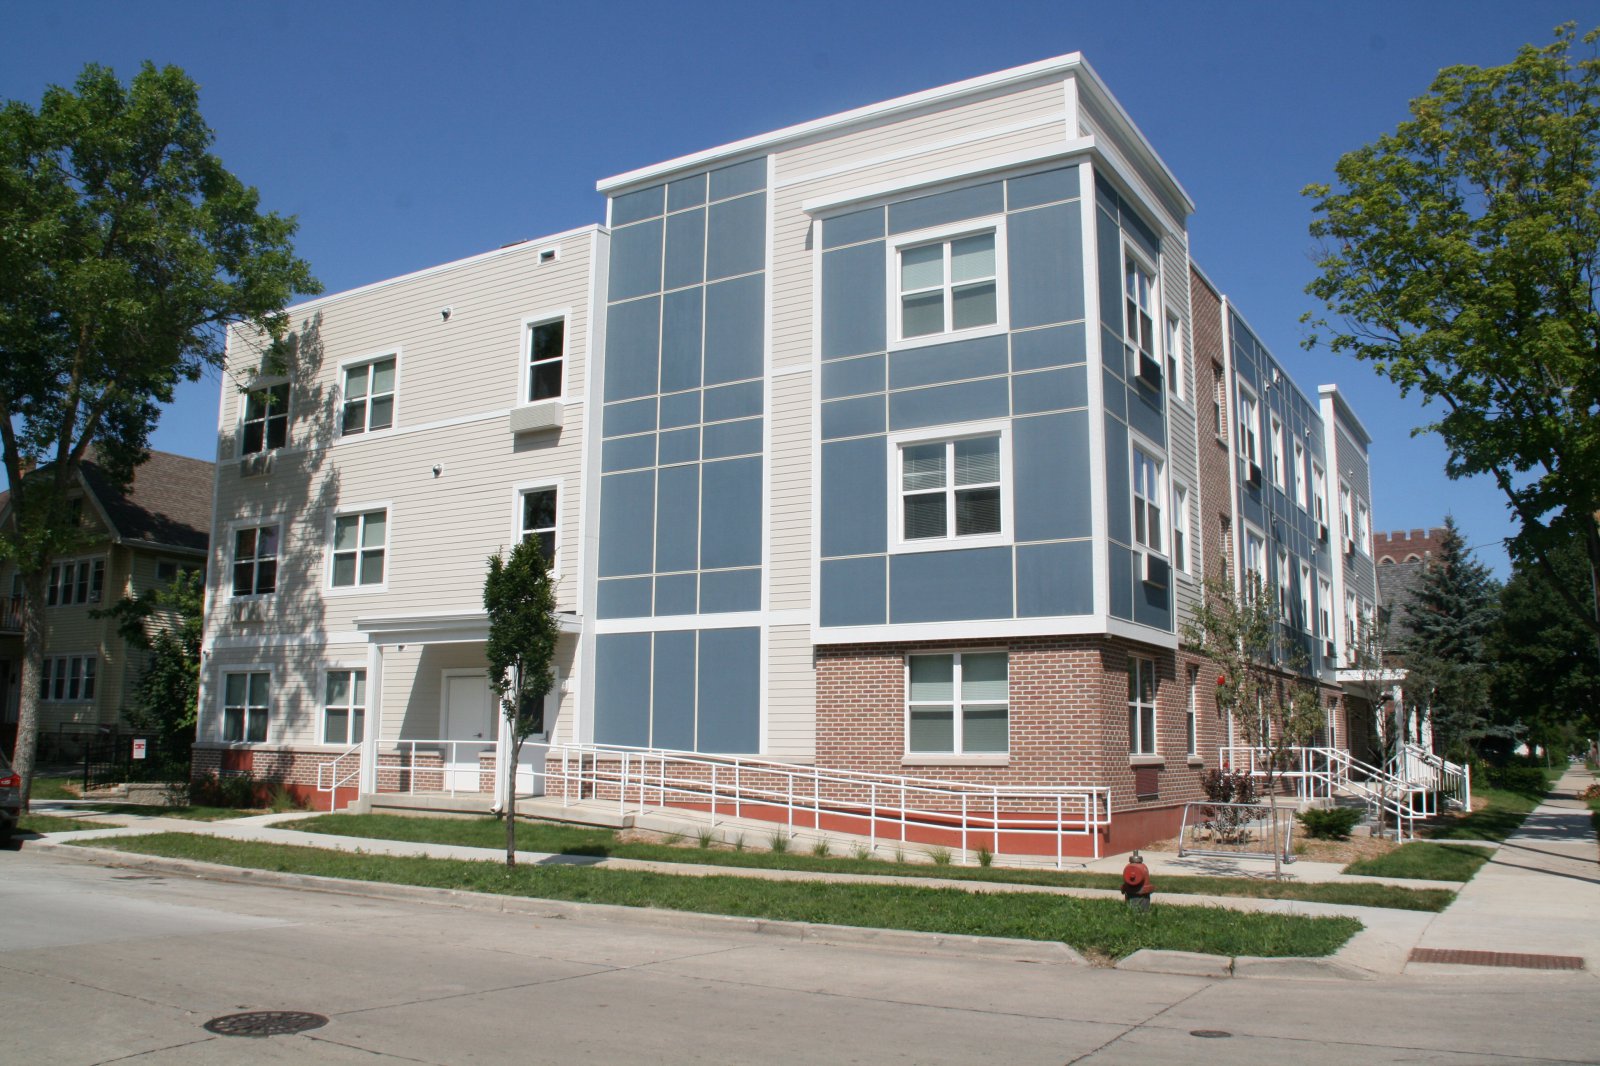 Clarke Square Apartments - 2330 W. Mineral St.